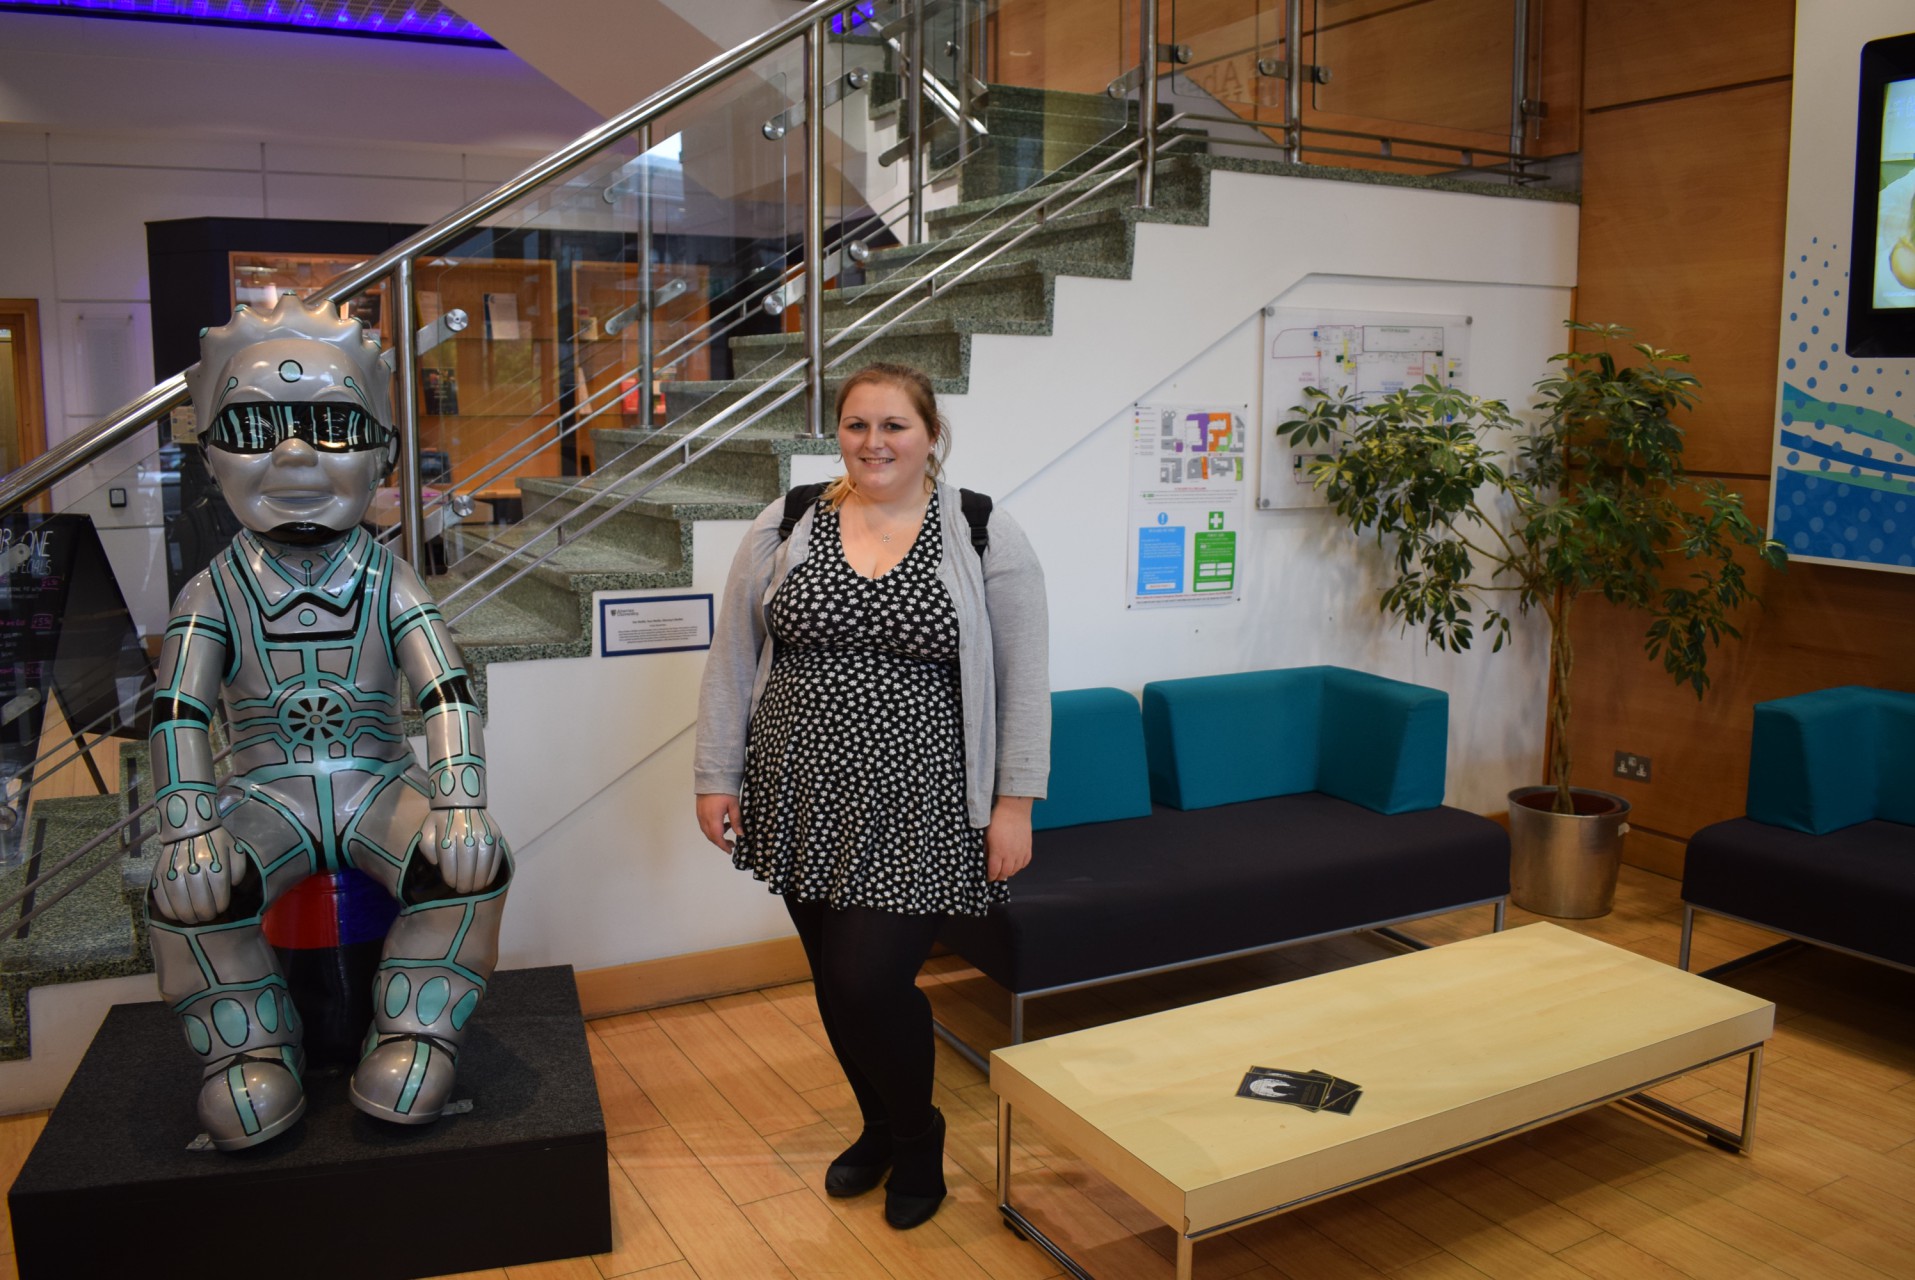 Abertay student who battled PTSD urges others to seek mental health support